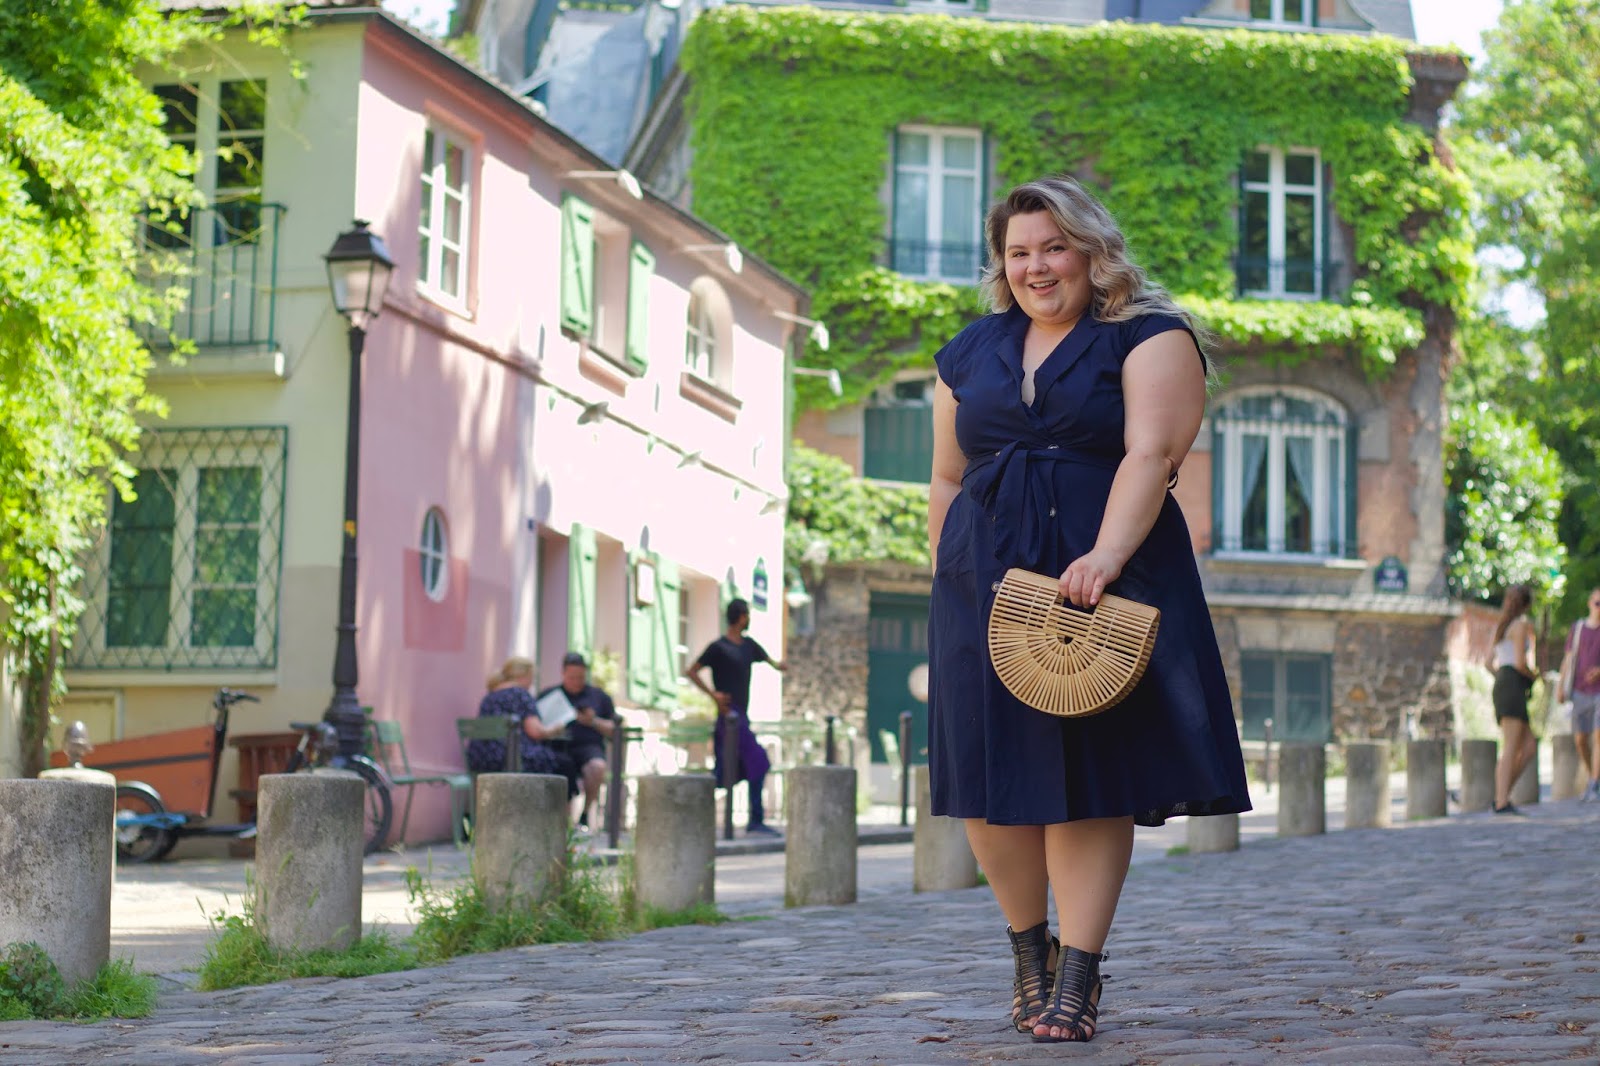 Chicago Plus Size Petite Fashion Blogger, influencer, YouTuber, and model Natalie Craig, of Natalie in the City, wears City Chic's fit and flare midi dress from Dia & Co while visiting this cute pink restaurant, La Maison Rose in Paris, France.